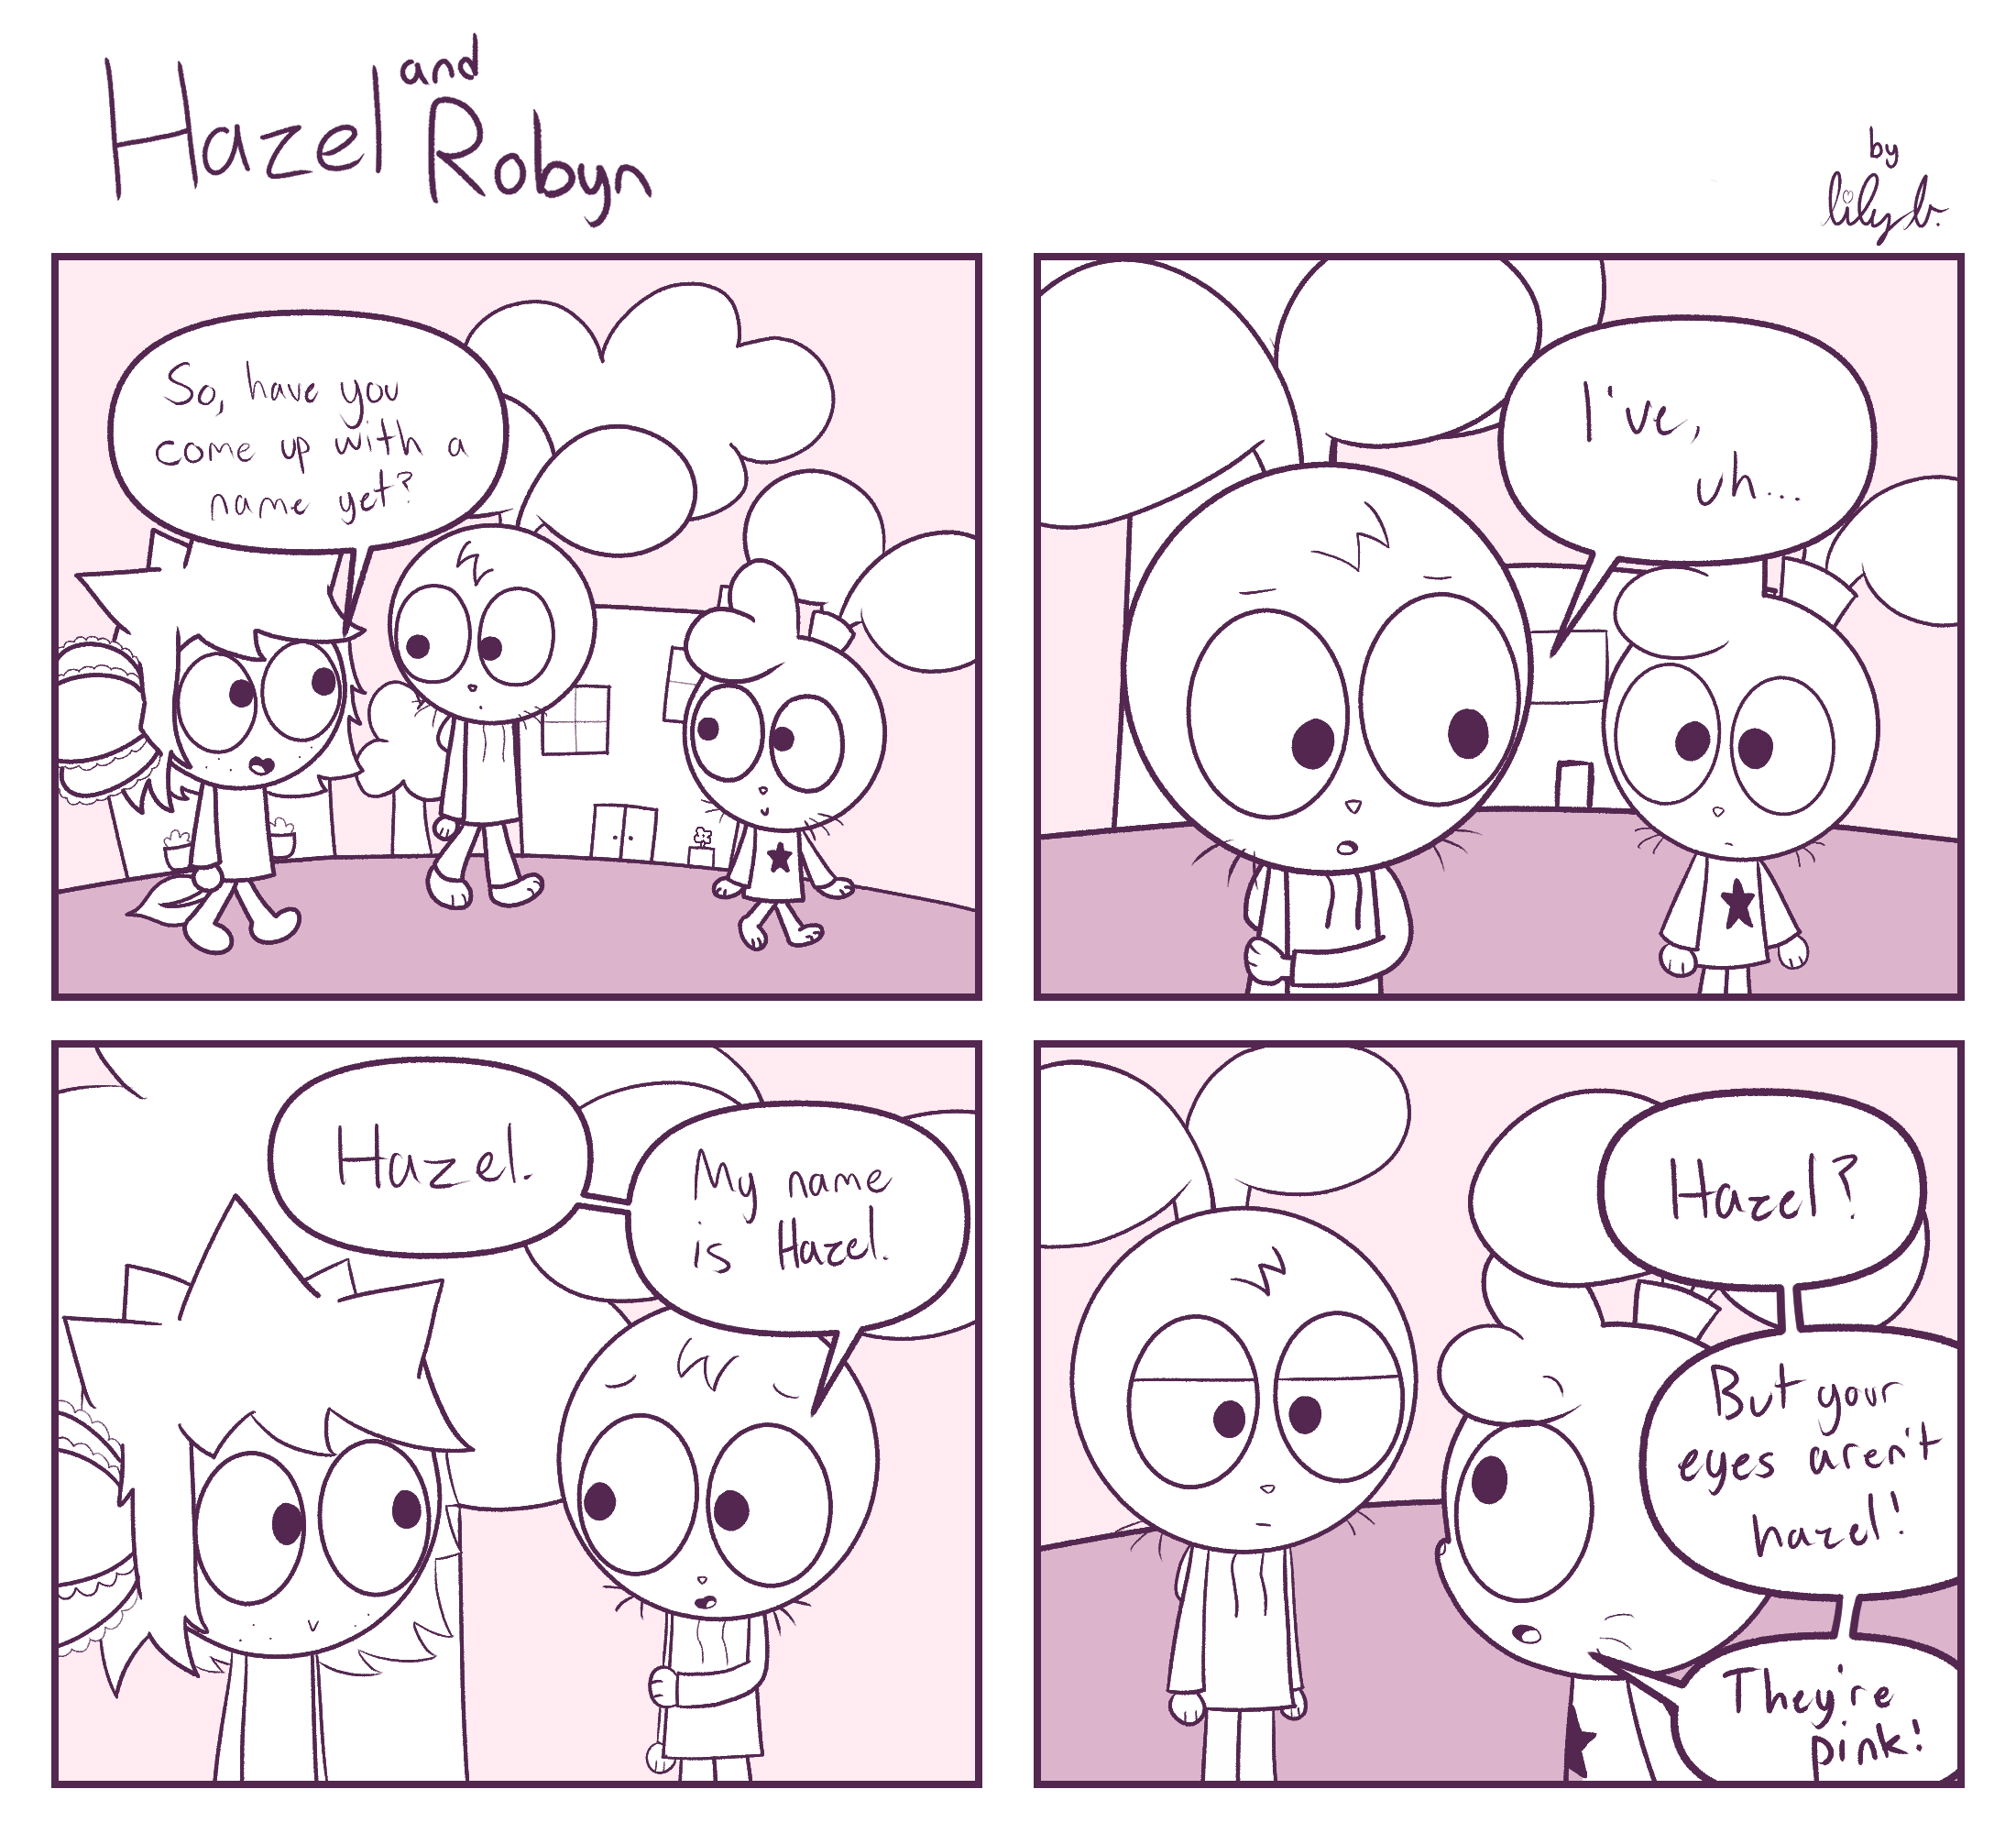 Panel 1: Tapioca: So have you come up with a name yet? | Panel 2: Hazel: I've, uh... | Panel 3: Hazel: Hazel. My name is Hazel. | Panel 4: Robyn: Hazel? But your eyes aren't hazel! They're pink!